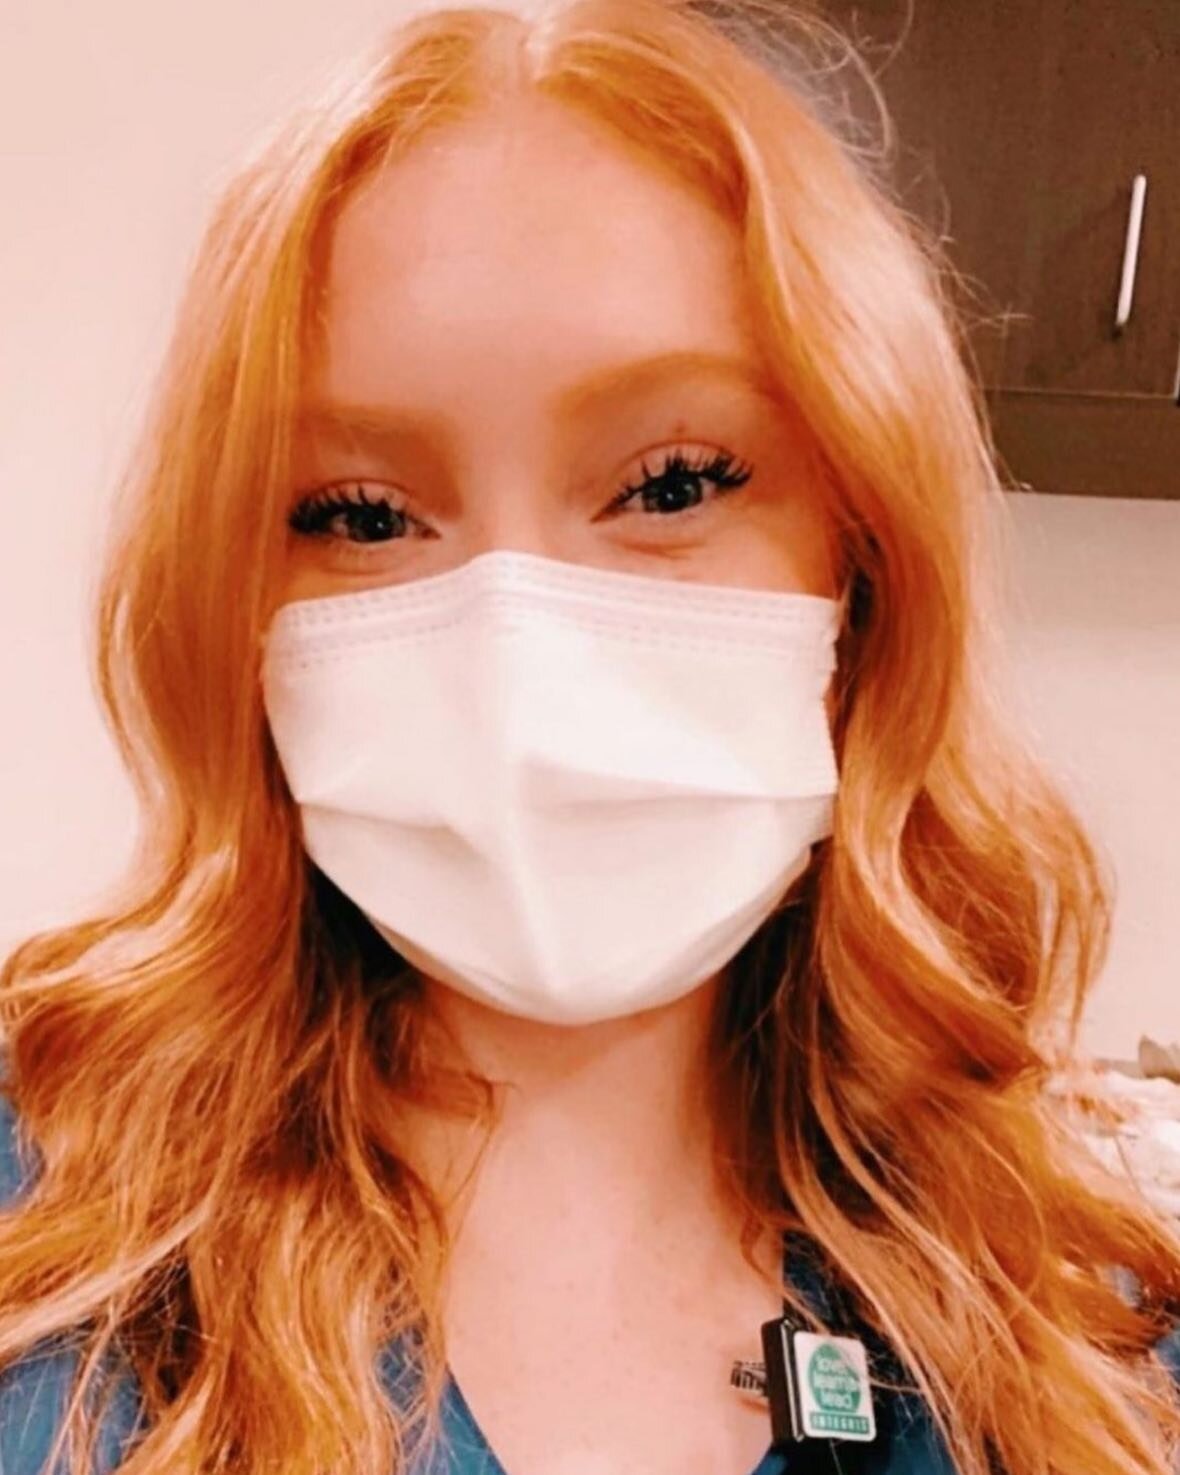 This is Kaylee. Kaylee wears a mask to protect others. Be like Kaylee. #GotMaskOK